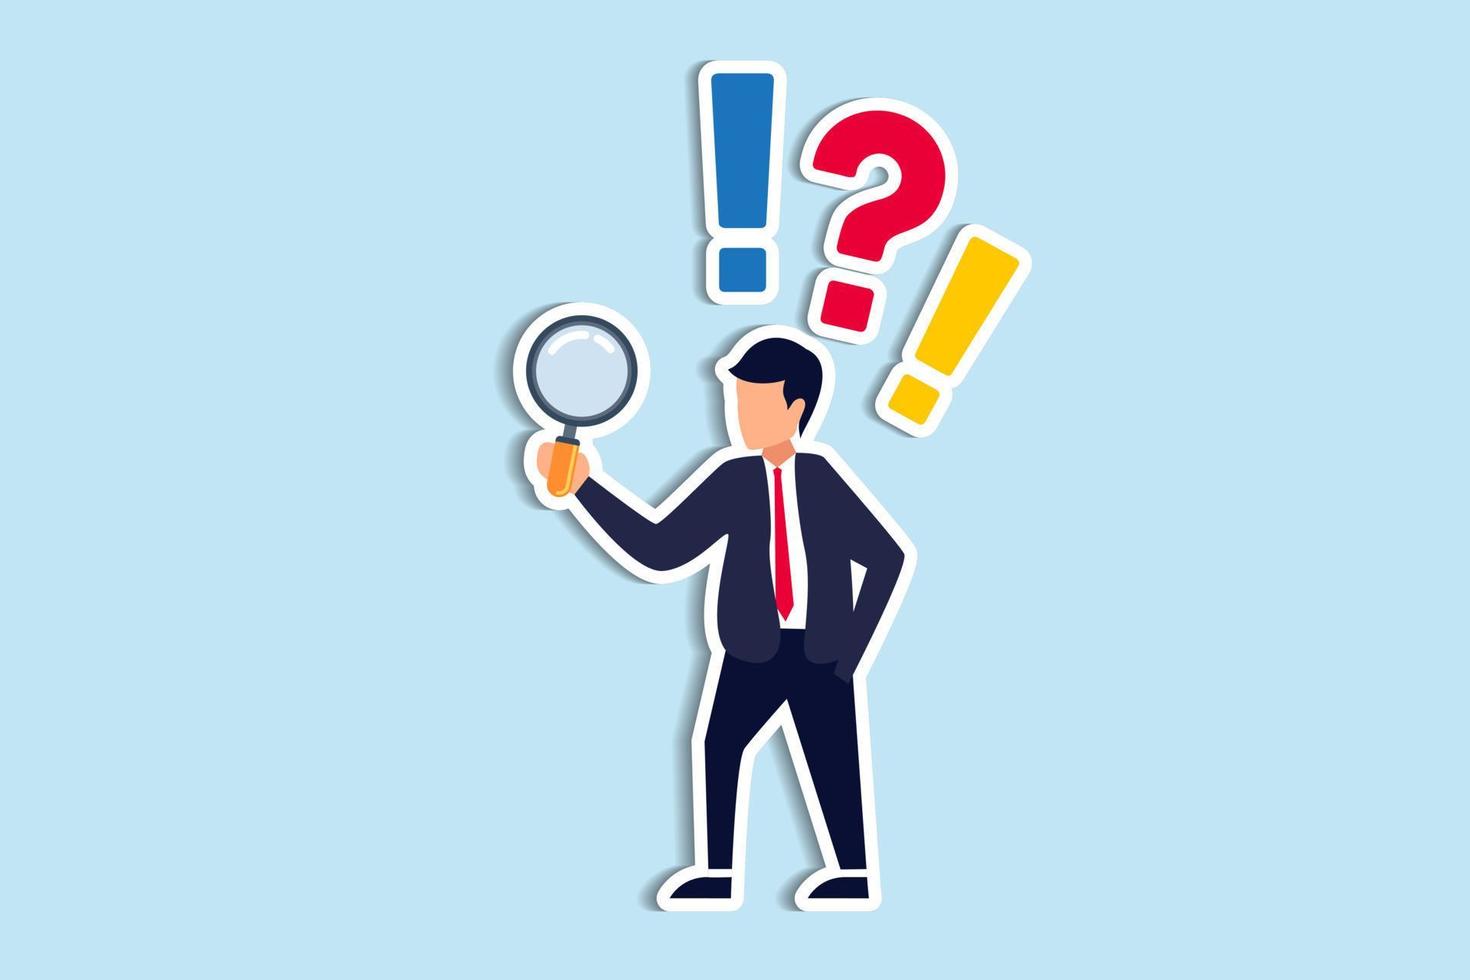 Observation or examination, curiosity to discover secret, search or analyze information, investigate or research concept, curious businessman holding magnifying glass observe data with question mark vector